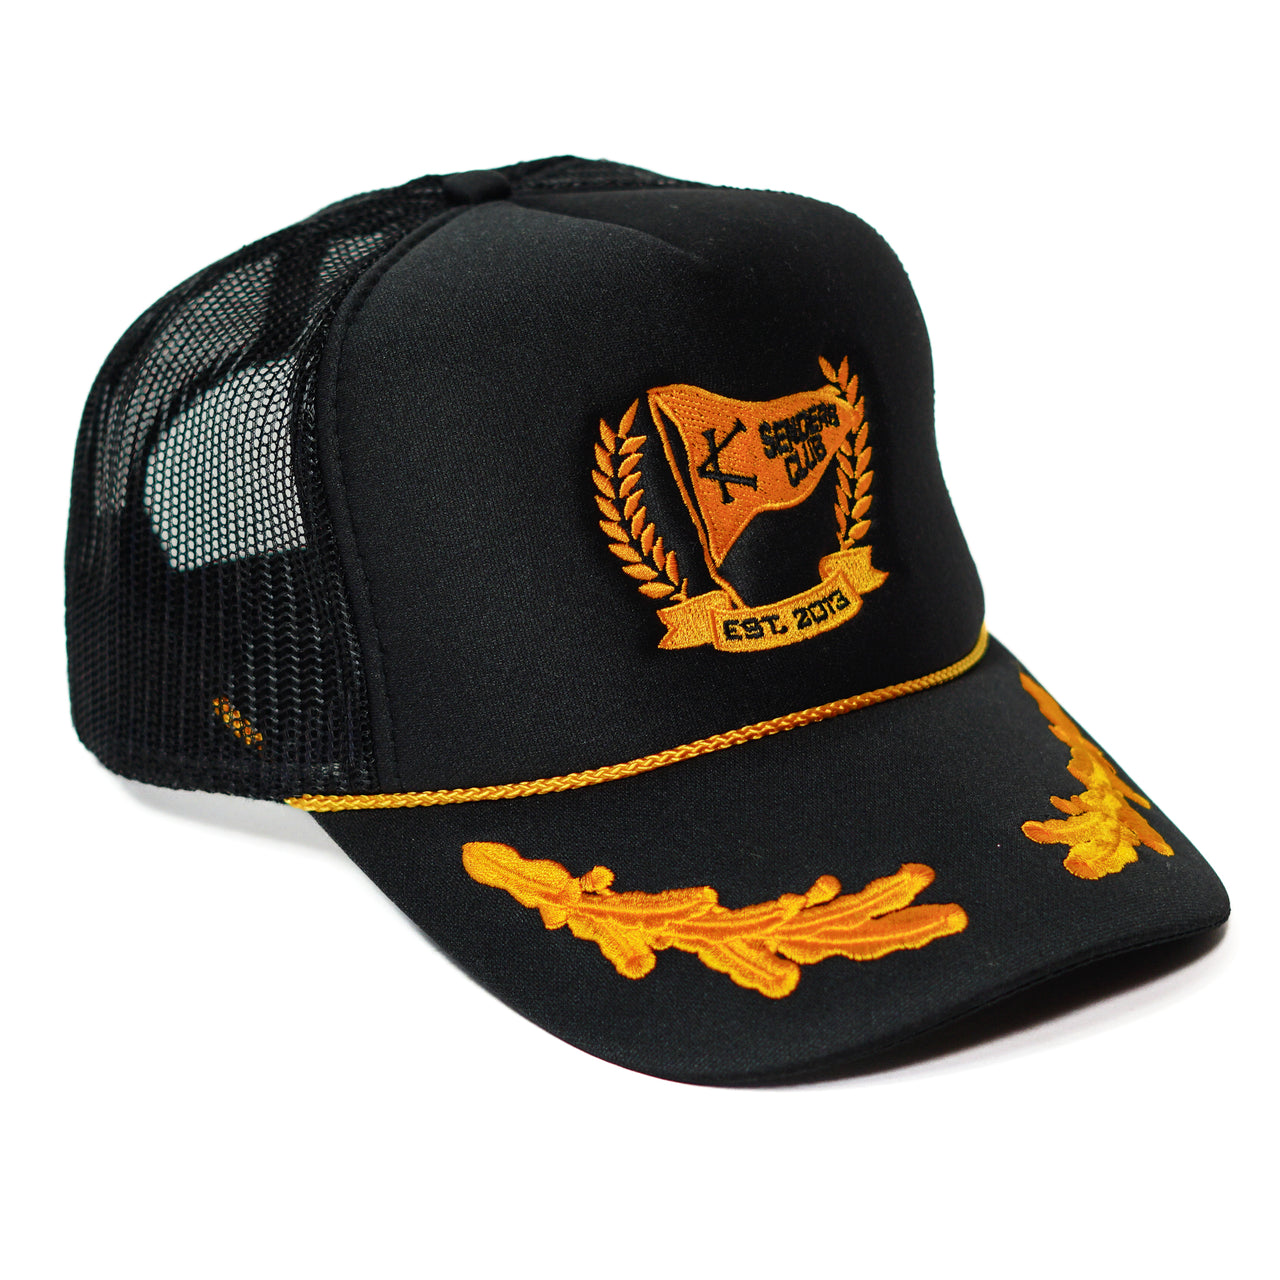 Senders Club Trucker Hat Limited Edition - Outlet